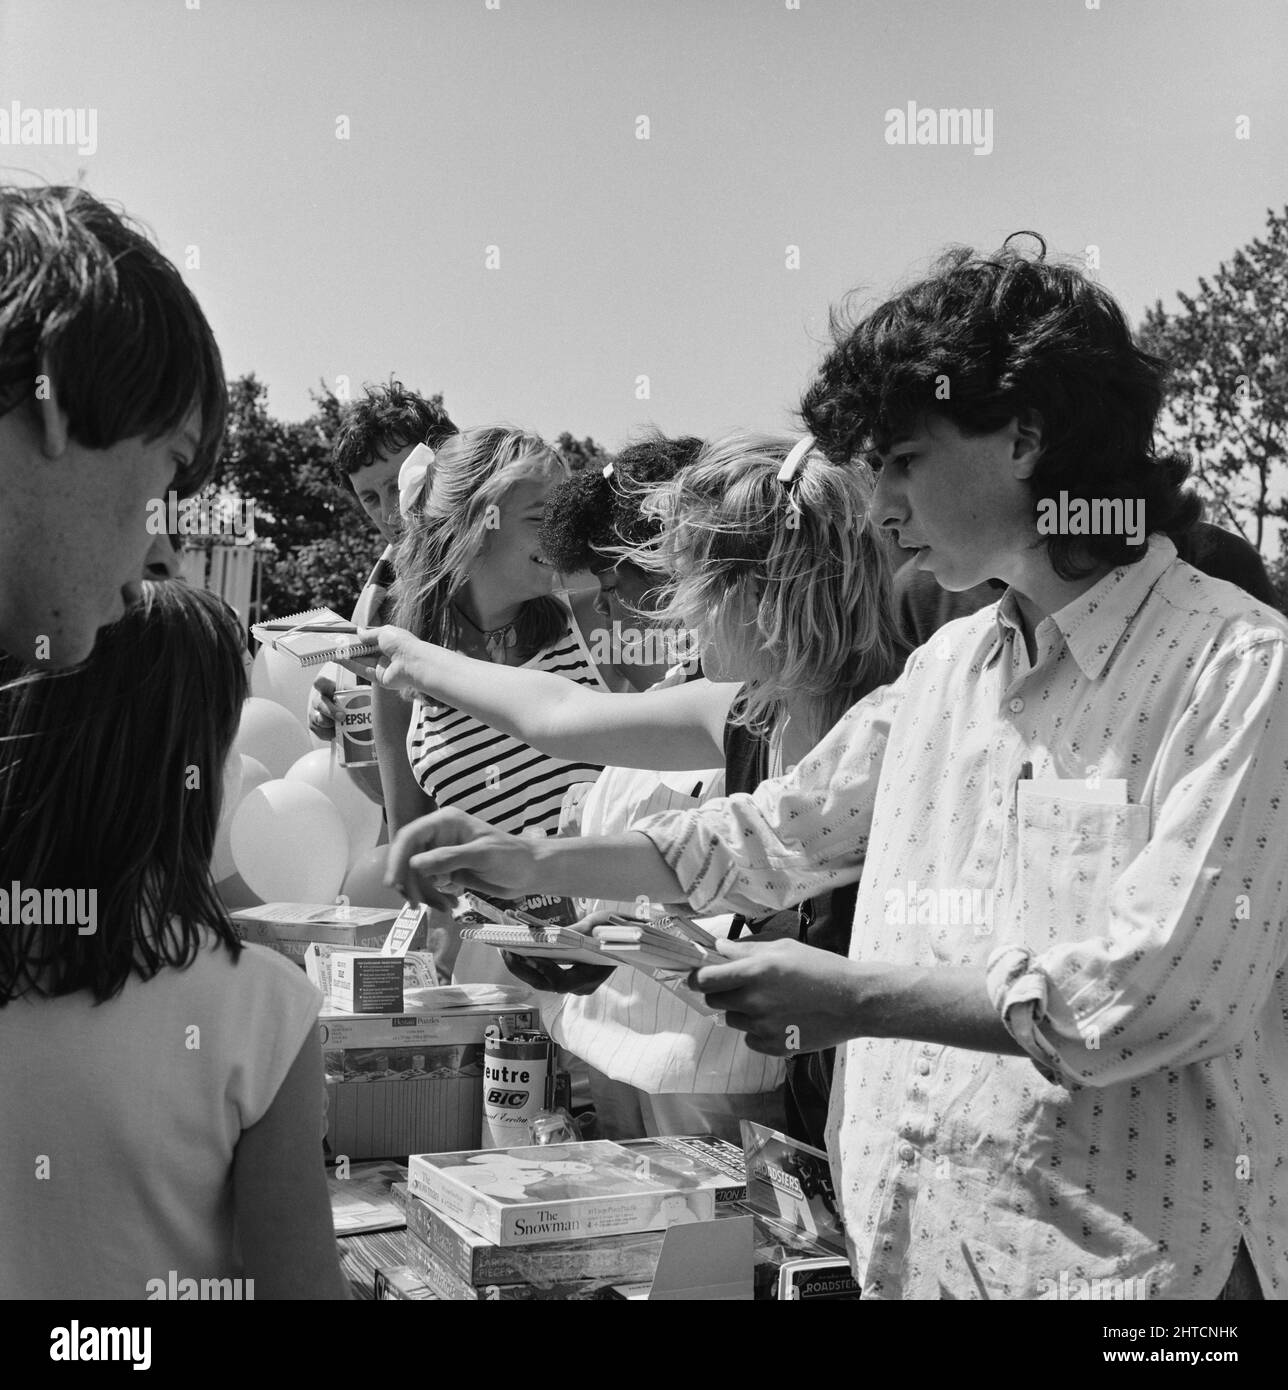 Laing Sports Ground, Rowley Lane, Elstree, Barnet, London, 21/06/1986. Cast members from the BBC school drama Grange Hill giving out prizes to entrants in the children's races at the 1986 Family Day at Laing's Sports Ground. Over 2500 people attended the Family Day and raised over &#xa3;700 for that year's designated charity The British Heart Foundation.  Attractions included; guest appearances by the cast of the television programme Grange Hill, a bouncy castle, donkey rides, Punch and Judy shows, Pierre the Clown, children's races, blindfold stunt driving and golf and six-a-side football tou Stock Photo